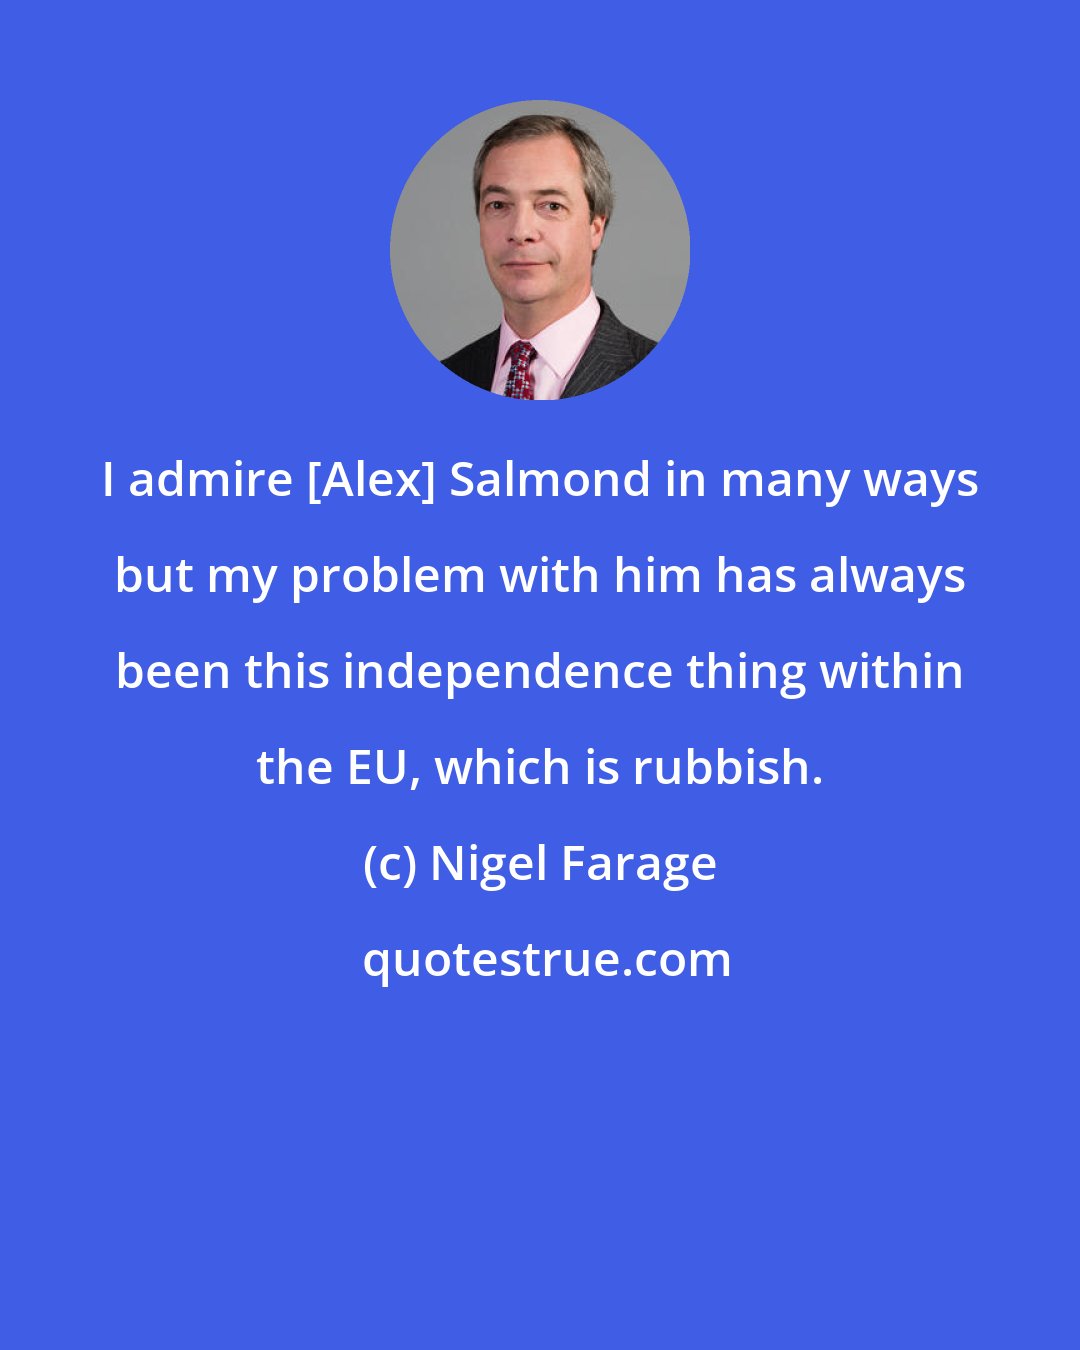 Nigel Farage: I admire [Alex] Salmond in many ways but my problem with him has always been this independence thing within the EU, which is rubbish.